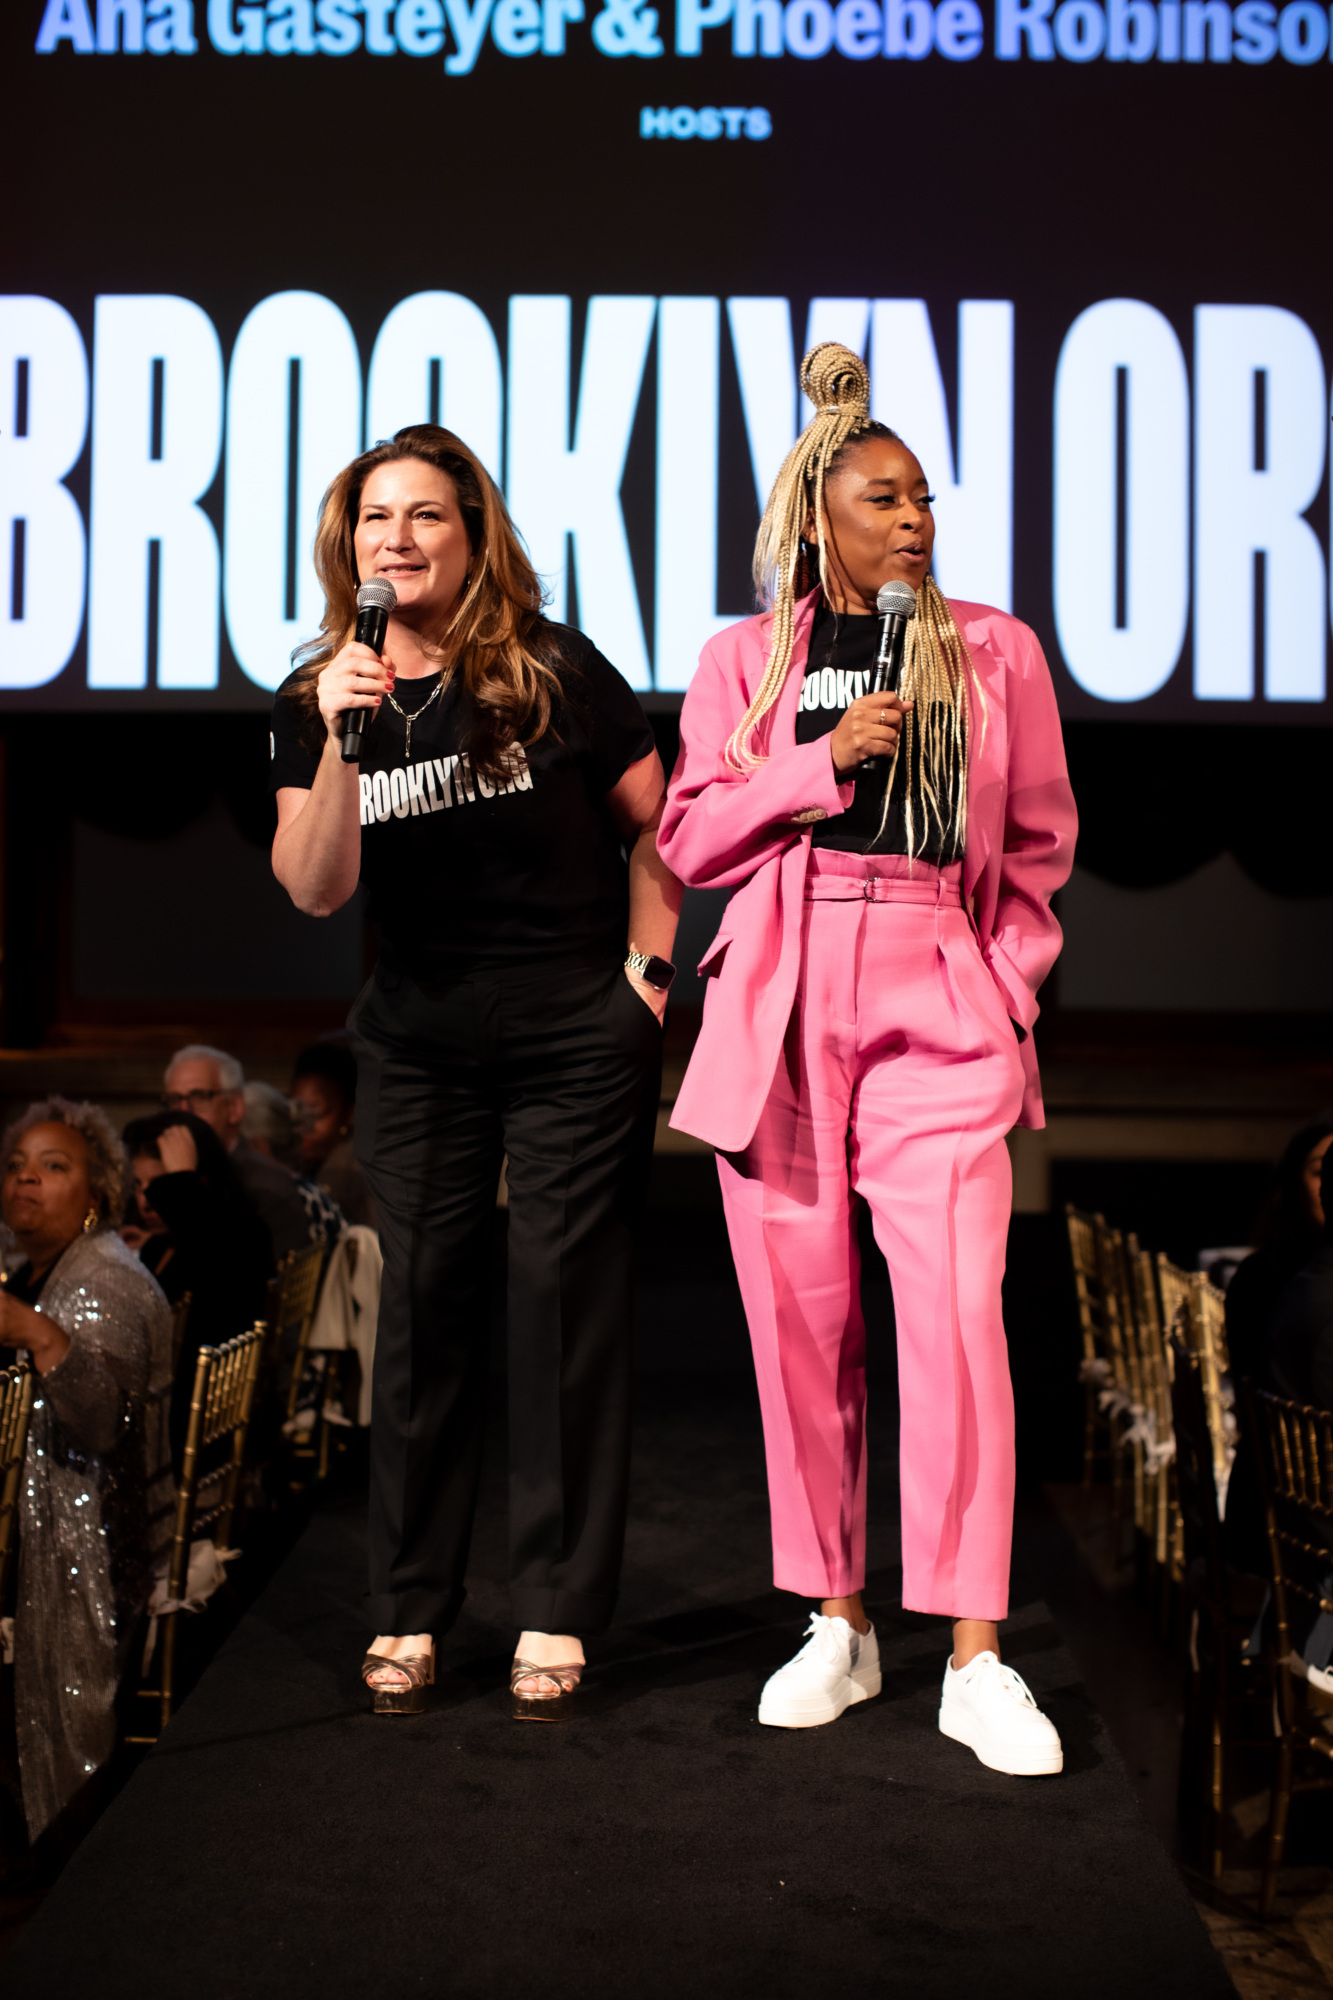 Two women on stage at the brooklyn or.